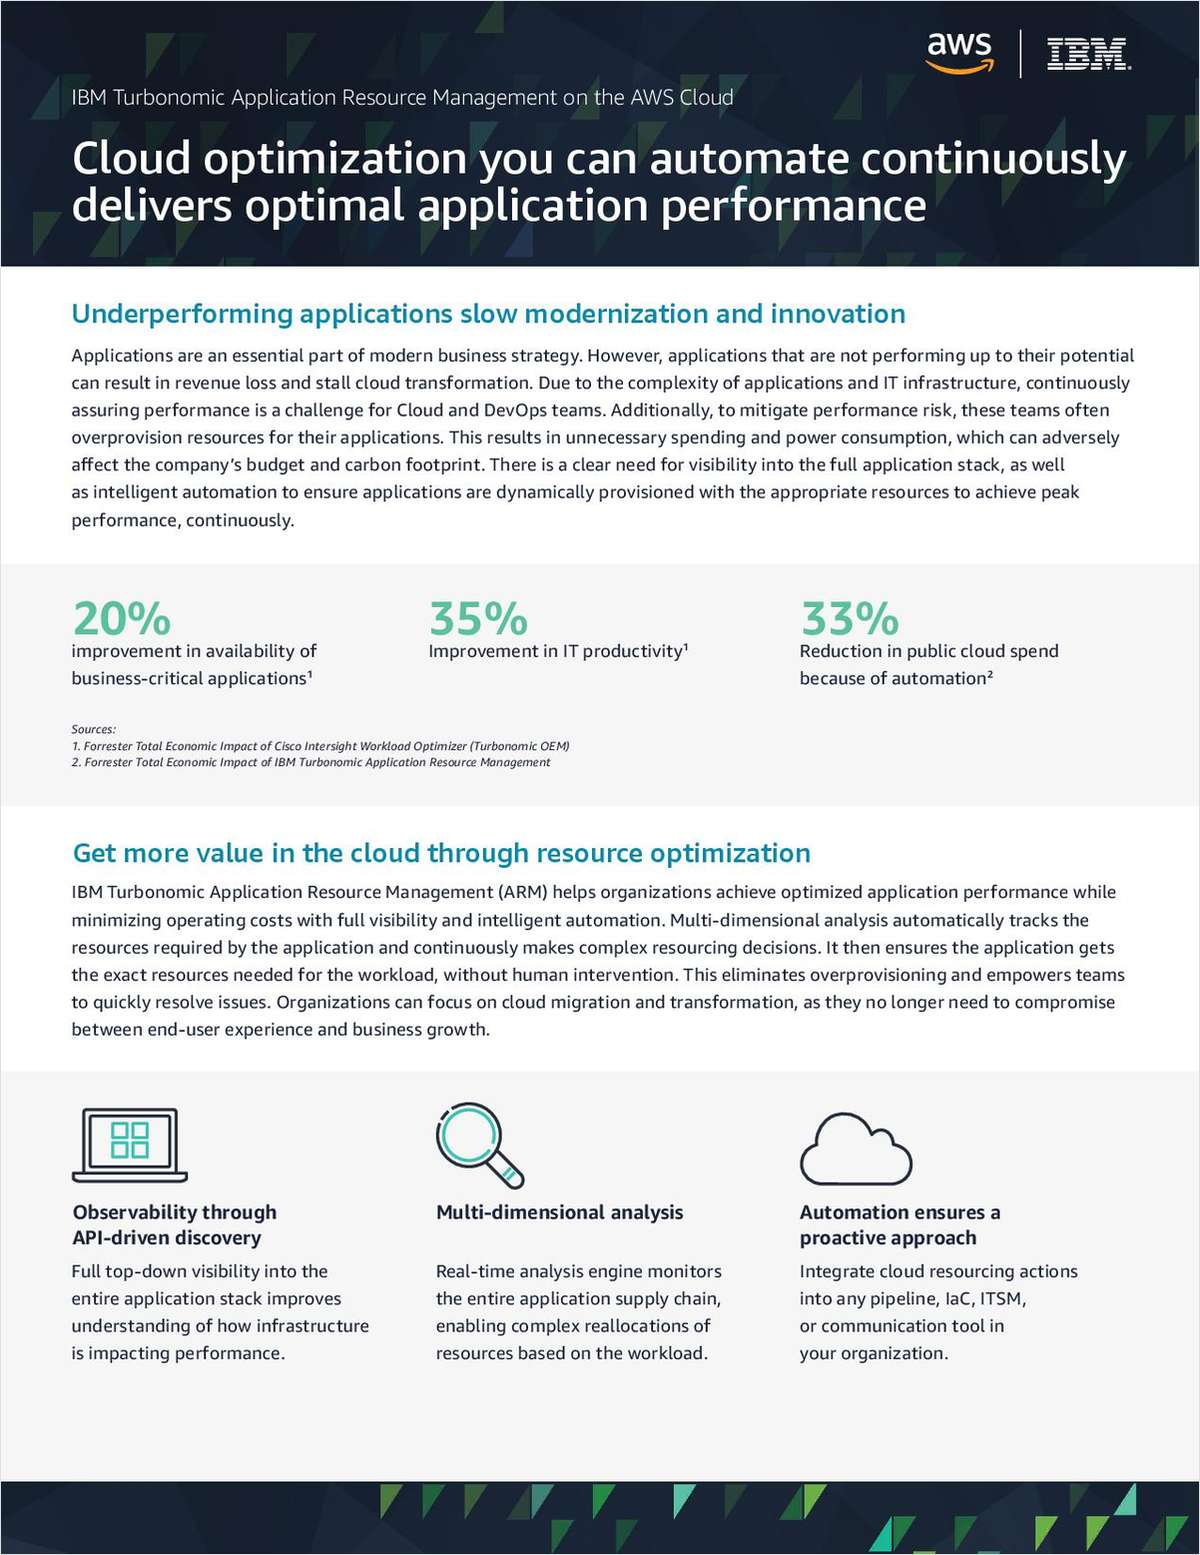 Cloud automation that helps optimize application performance